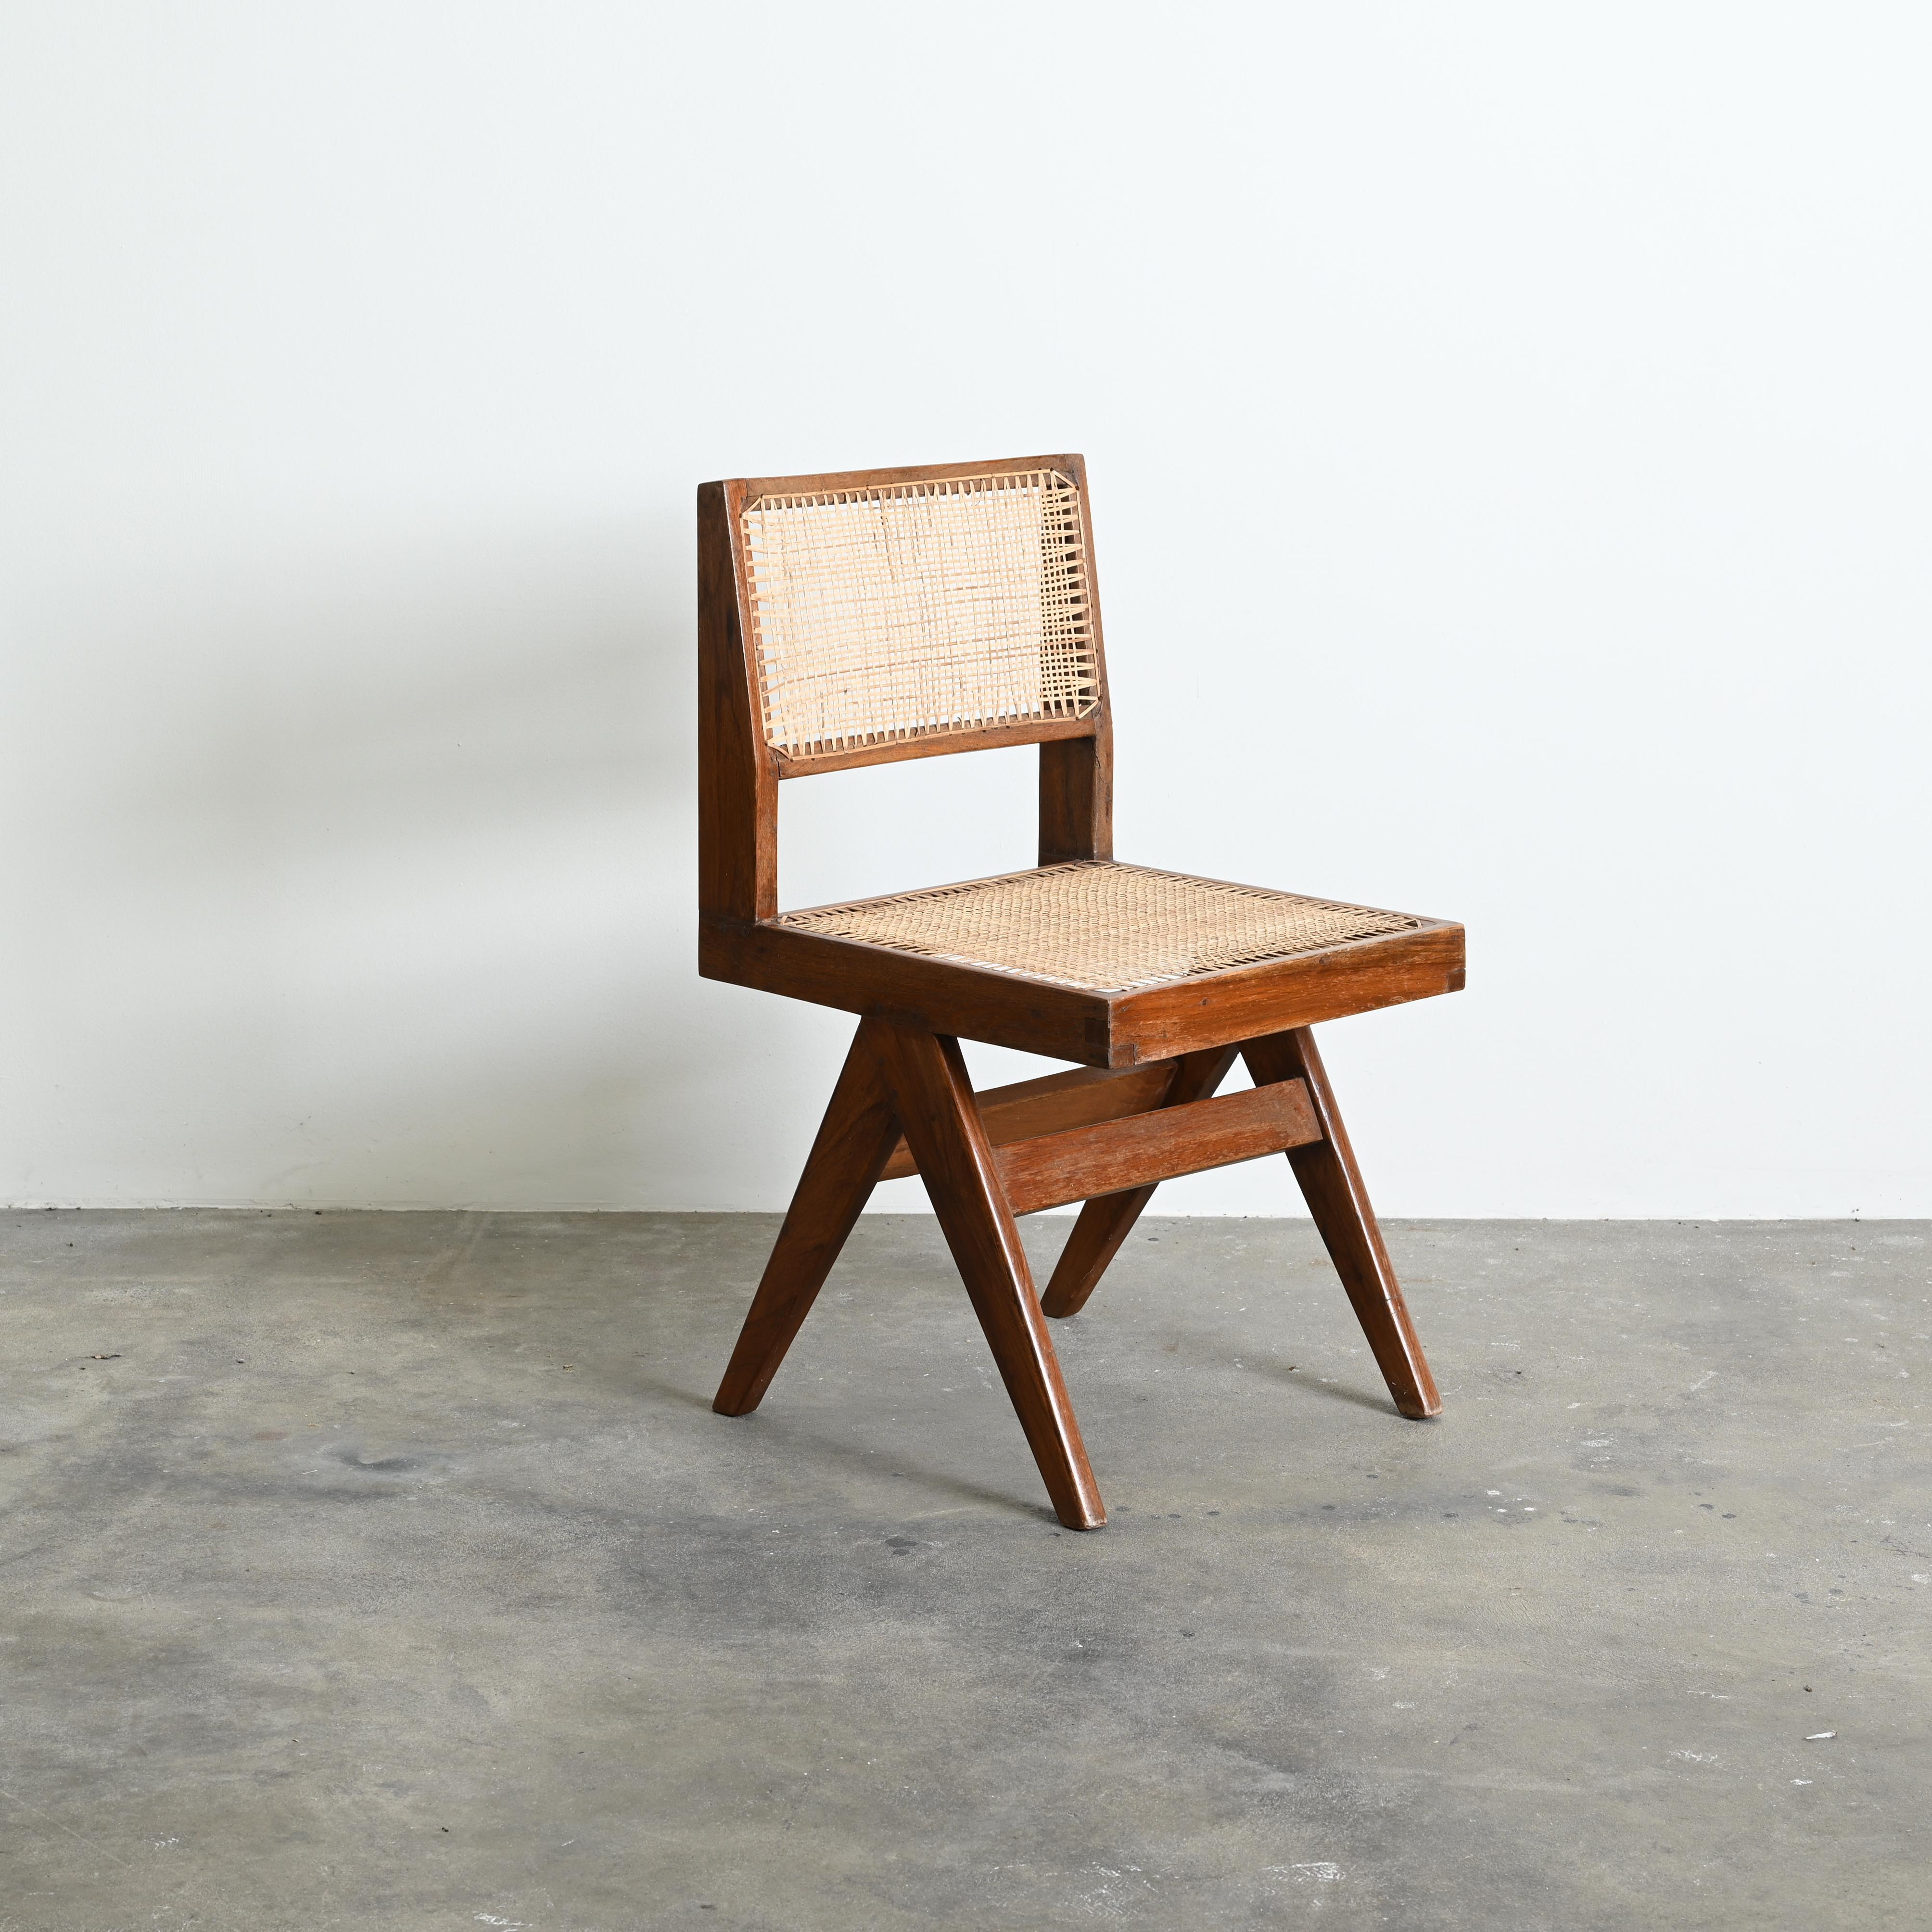 This chair is an iconic piece. It appears so simple and still so precise, where proportions seems to be perfect. This A-shaped legs are typical for Chandigarh objects. Then this L-shaped seat, where the beams get at the ends thinner. It is one of